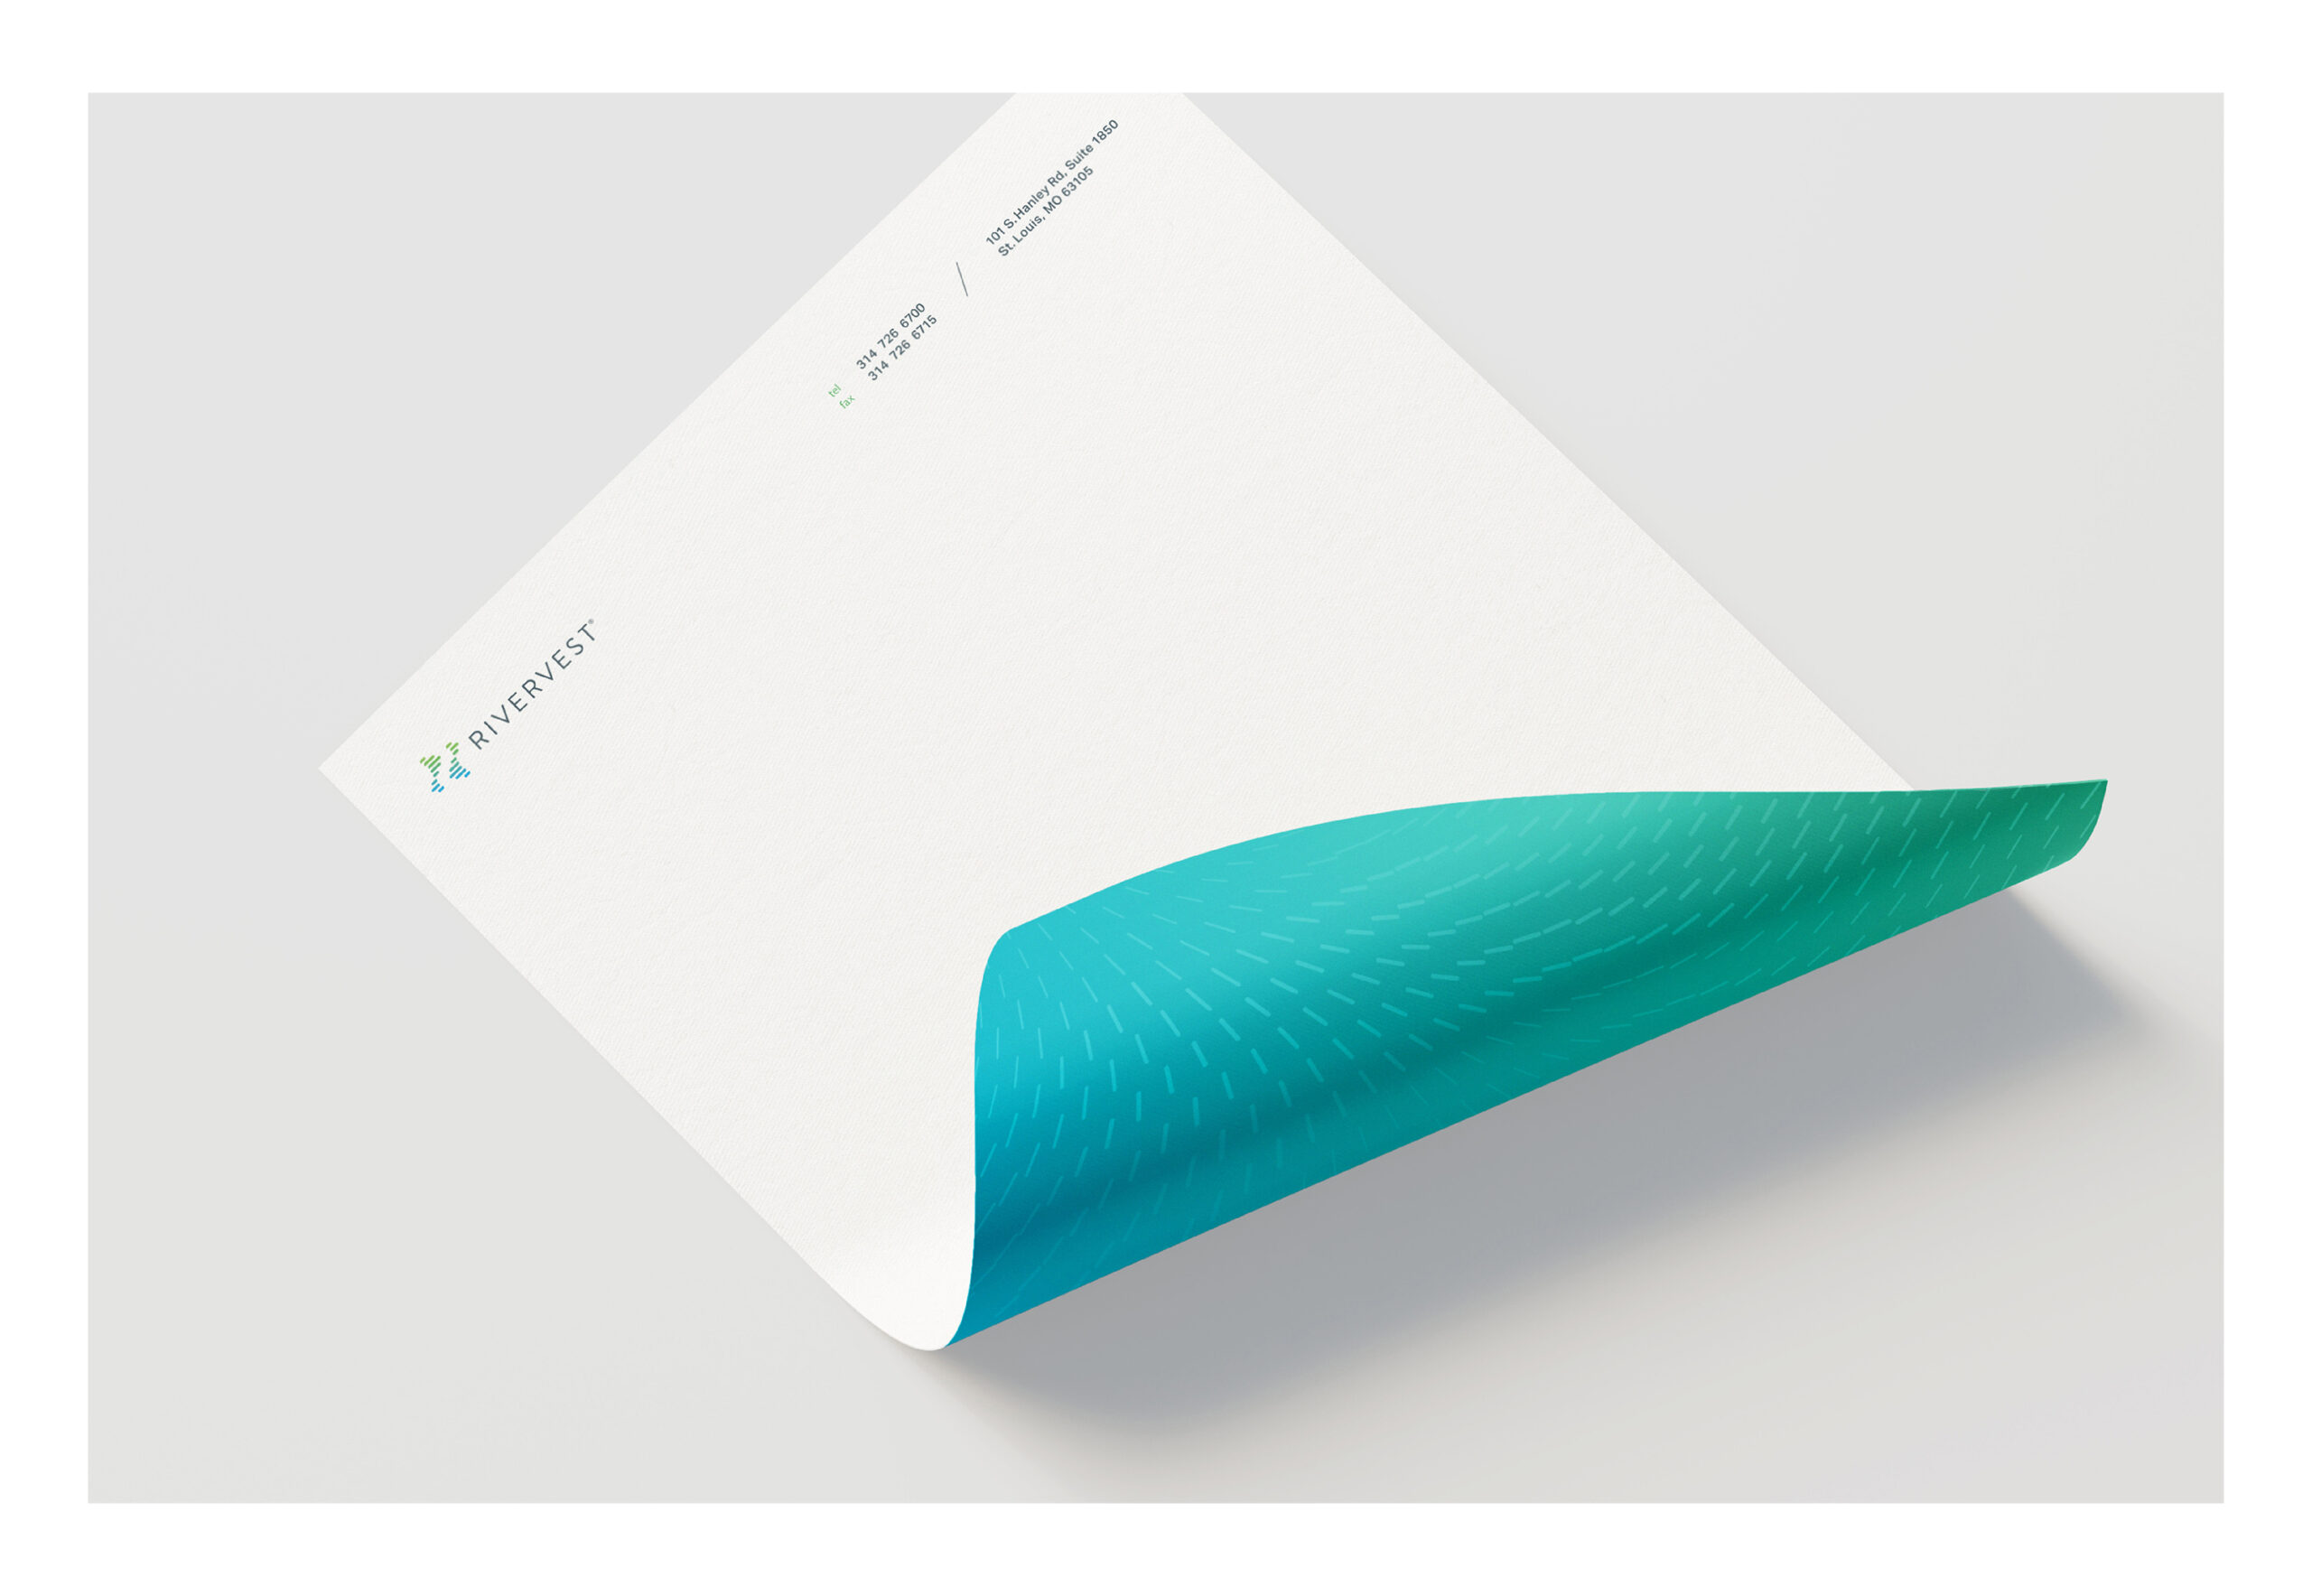 RiverVest letterhead front and back